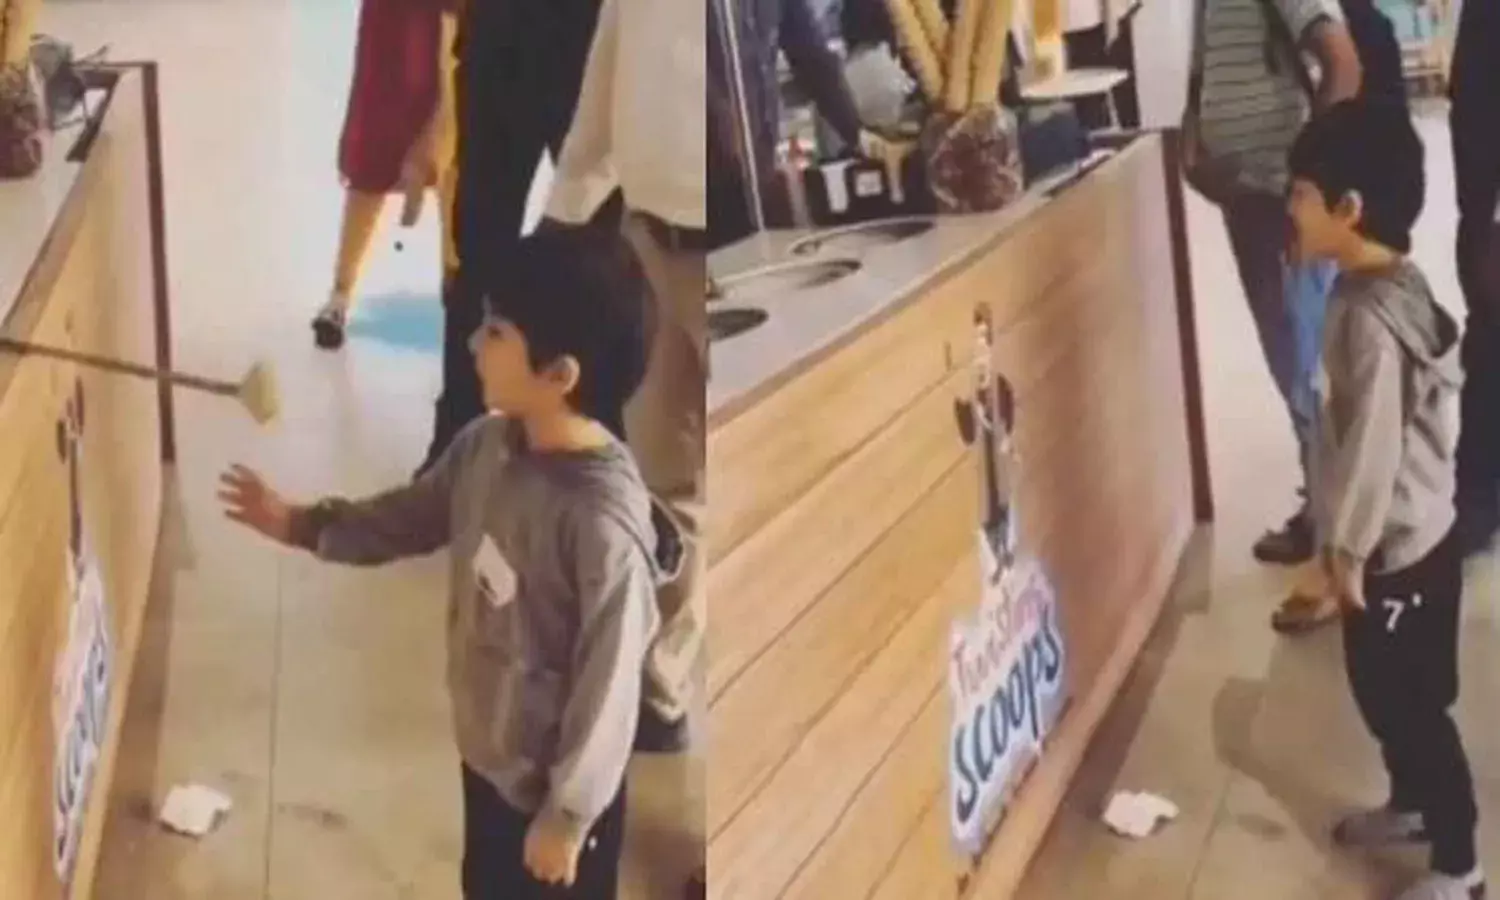 Taimur Ali Khan tries to snatch an ice cream from a Turkish vendor in this UNSEEN video